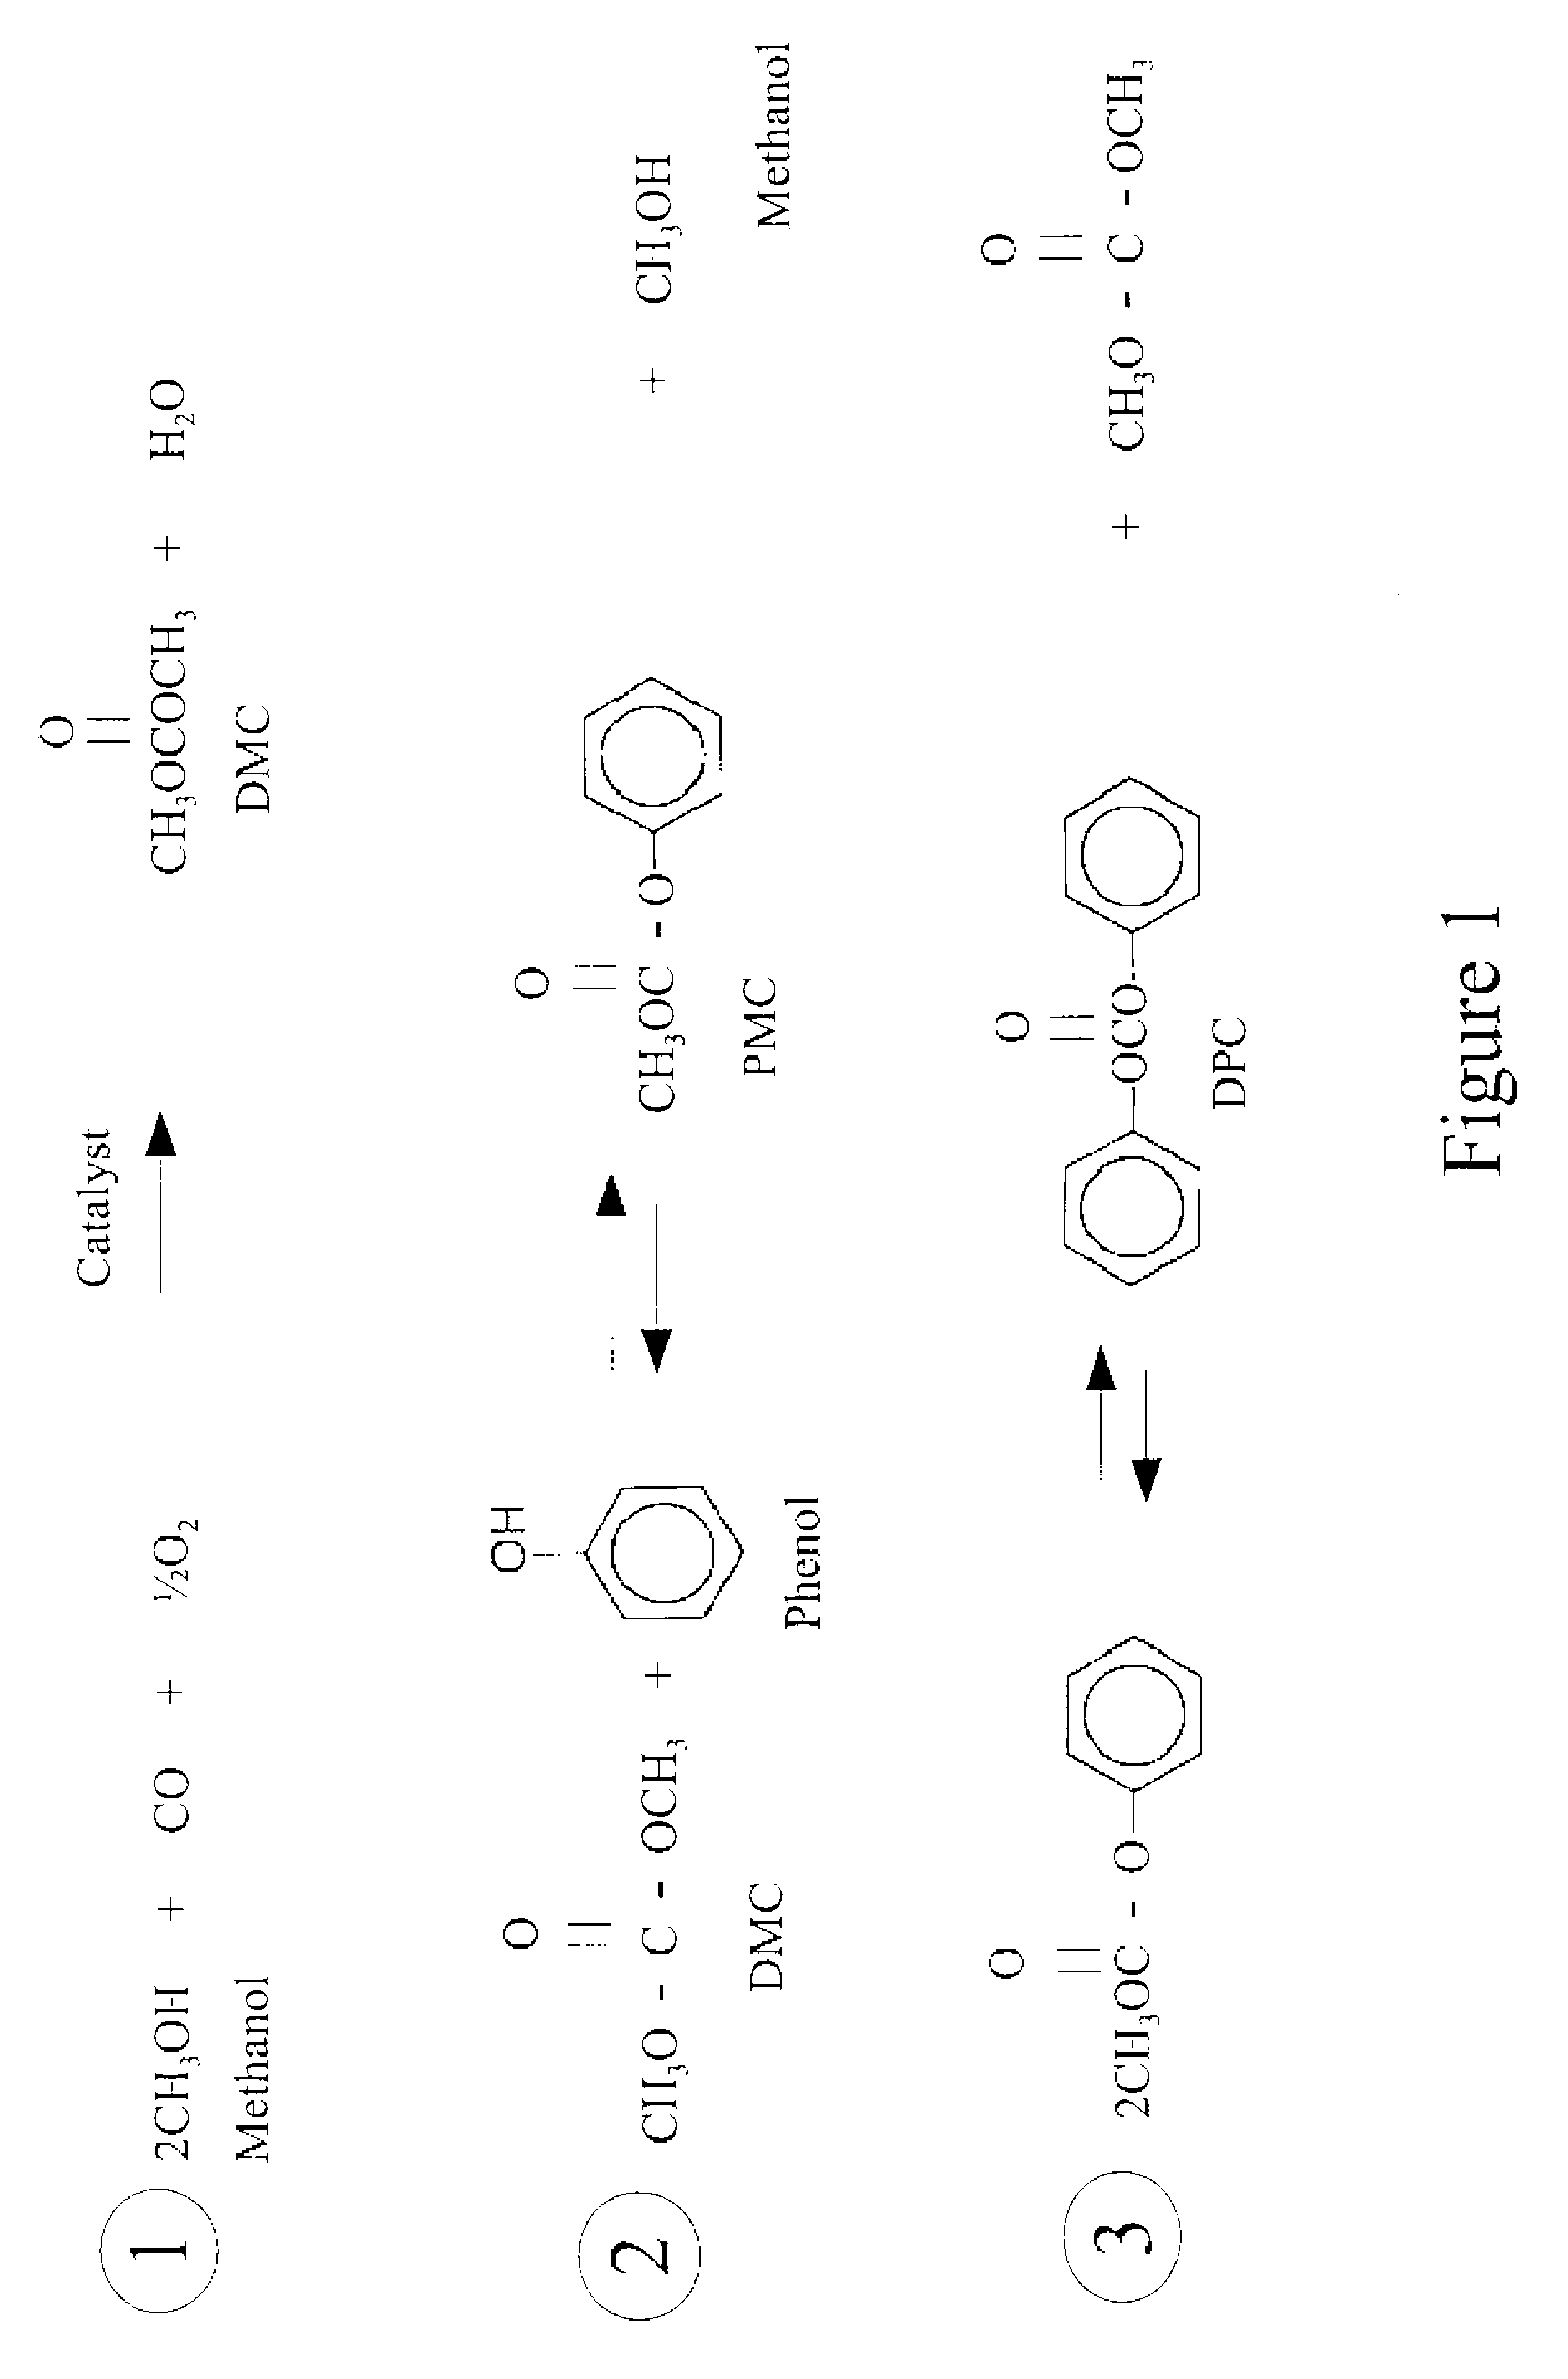 Process for manufacturing dimethyl carbonate